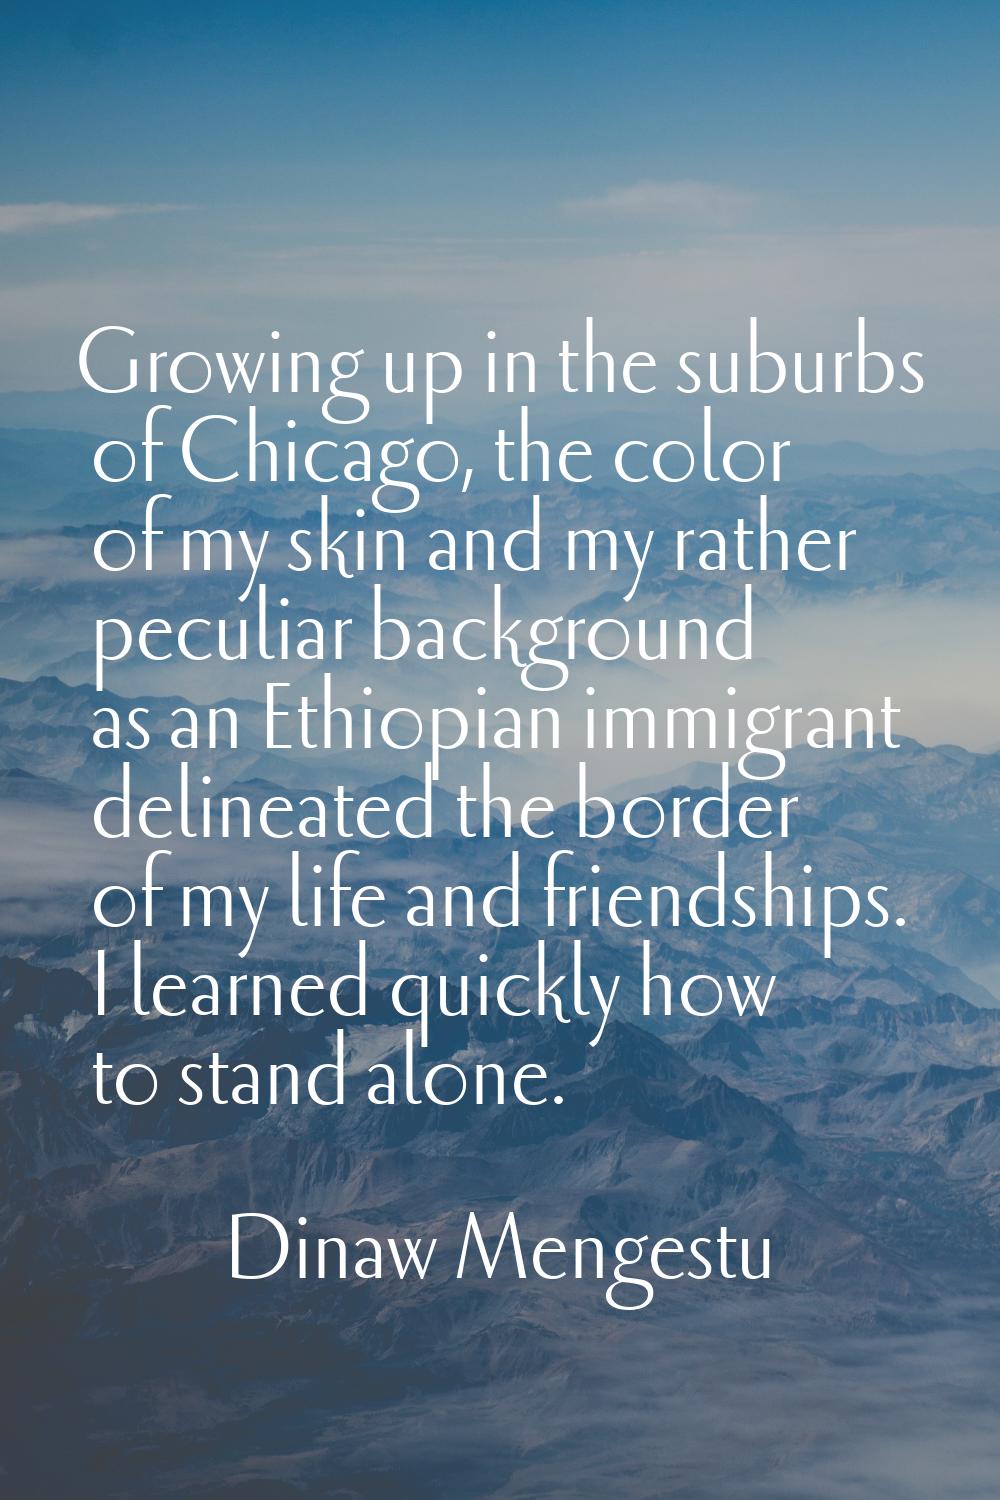 Growing up in the suburbs of Chicago, the color of my skin and my rather peculiar background as an 